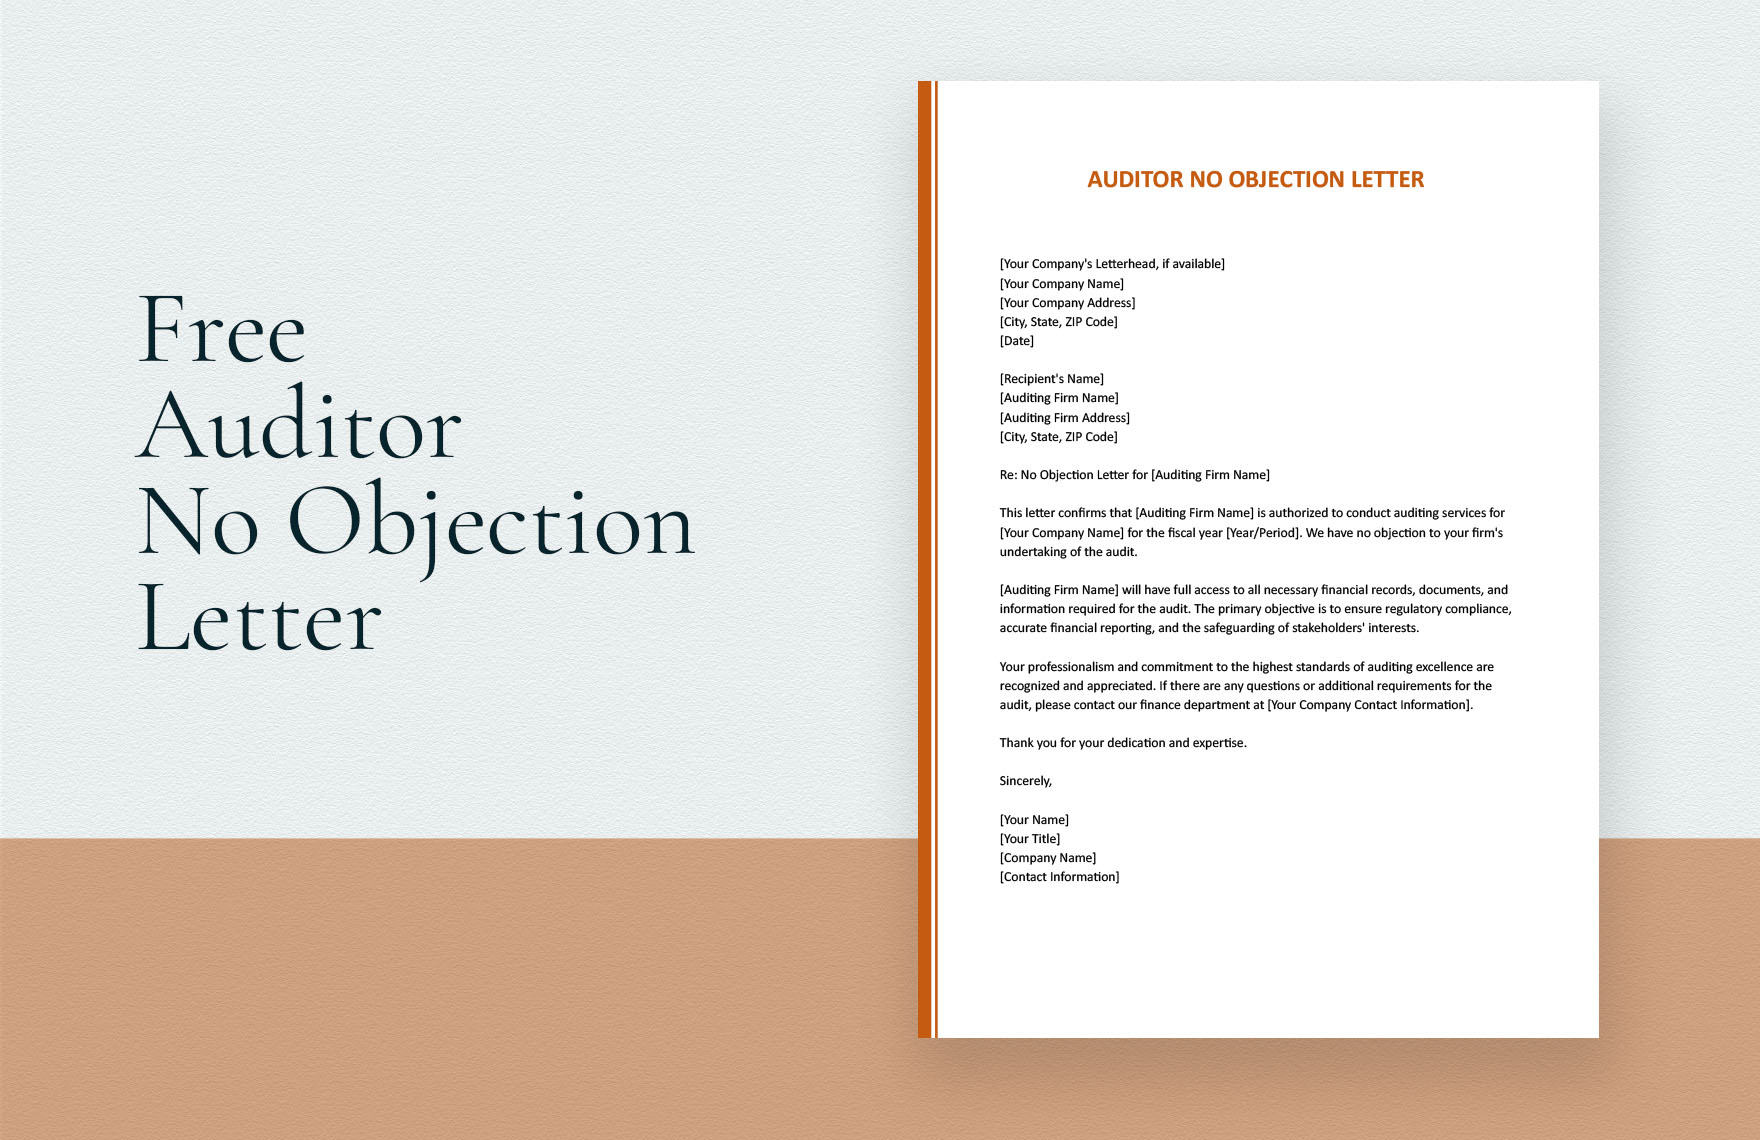 Auditor No Objection Letter